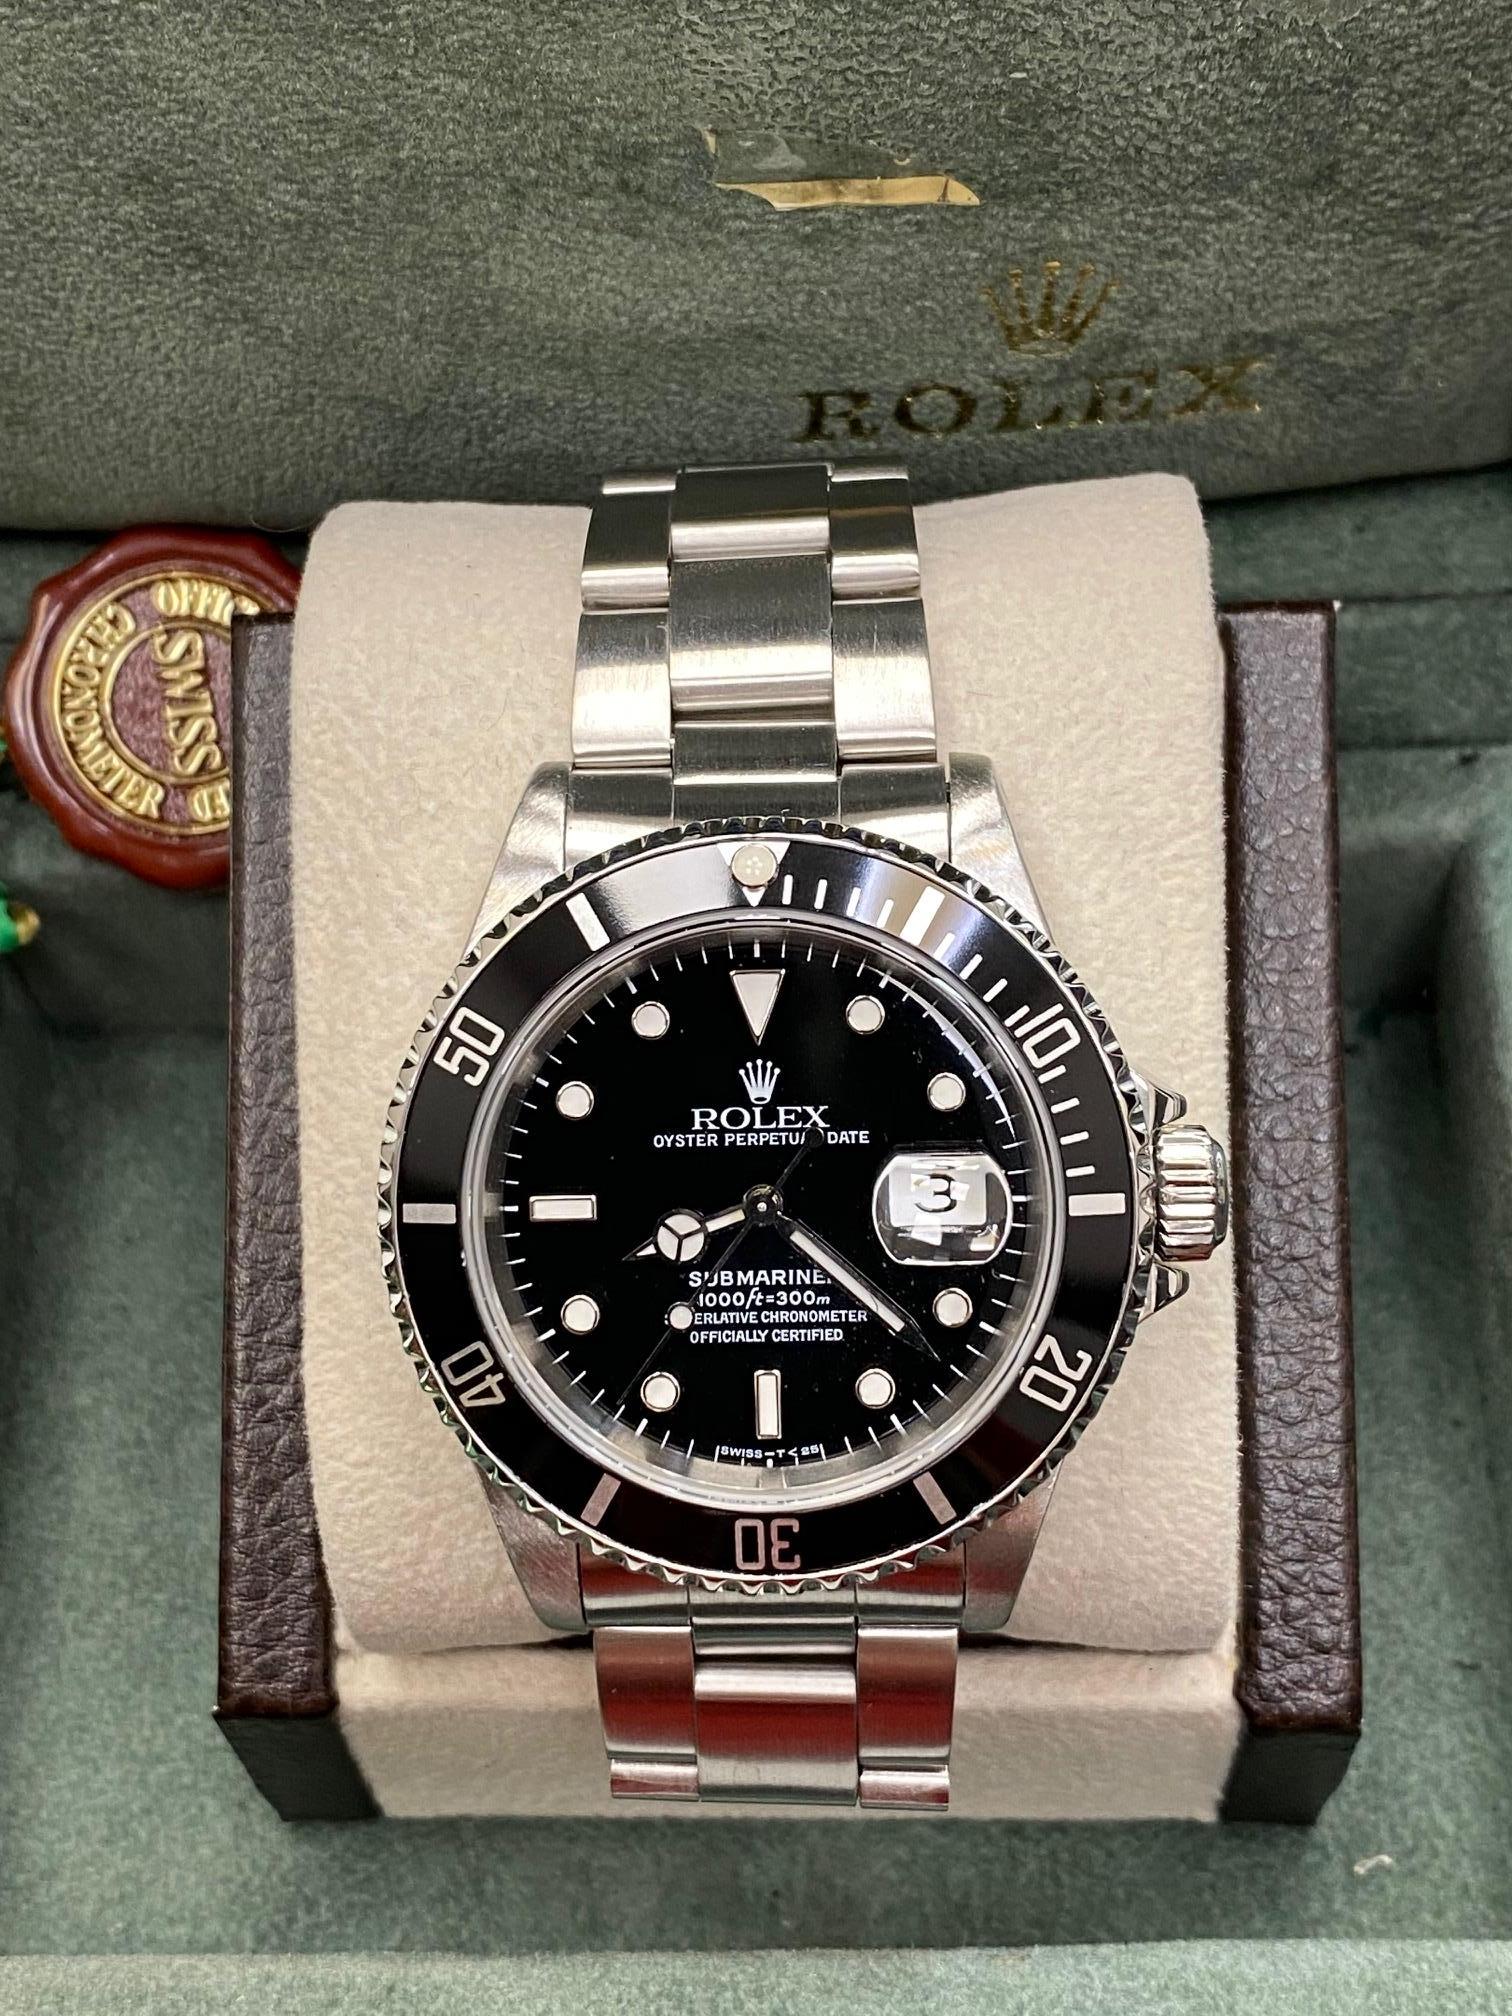 Style Number: 16610

 

Serial: X789***

 

Model: Submariner 

 

Case Material: Stainless Steel

 

Band: Stainless Steel

 

Bezel: Black

 

Dial: Black

 

Face: Sapphire Crystal

 

Case Size: 40mm

 

Includes: 

-Rolex Box &